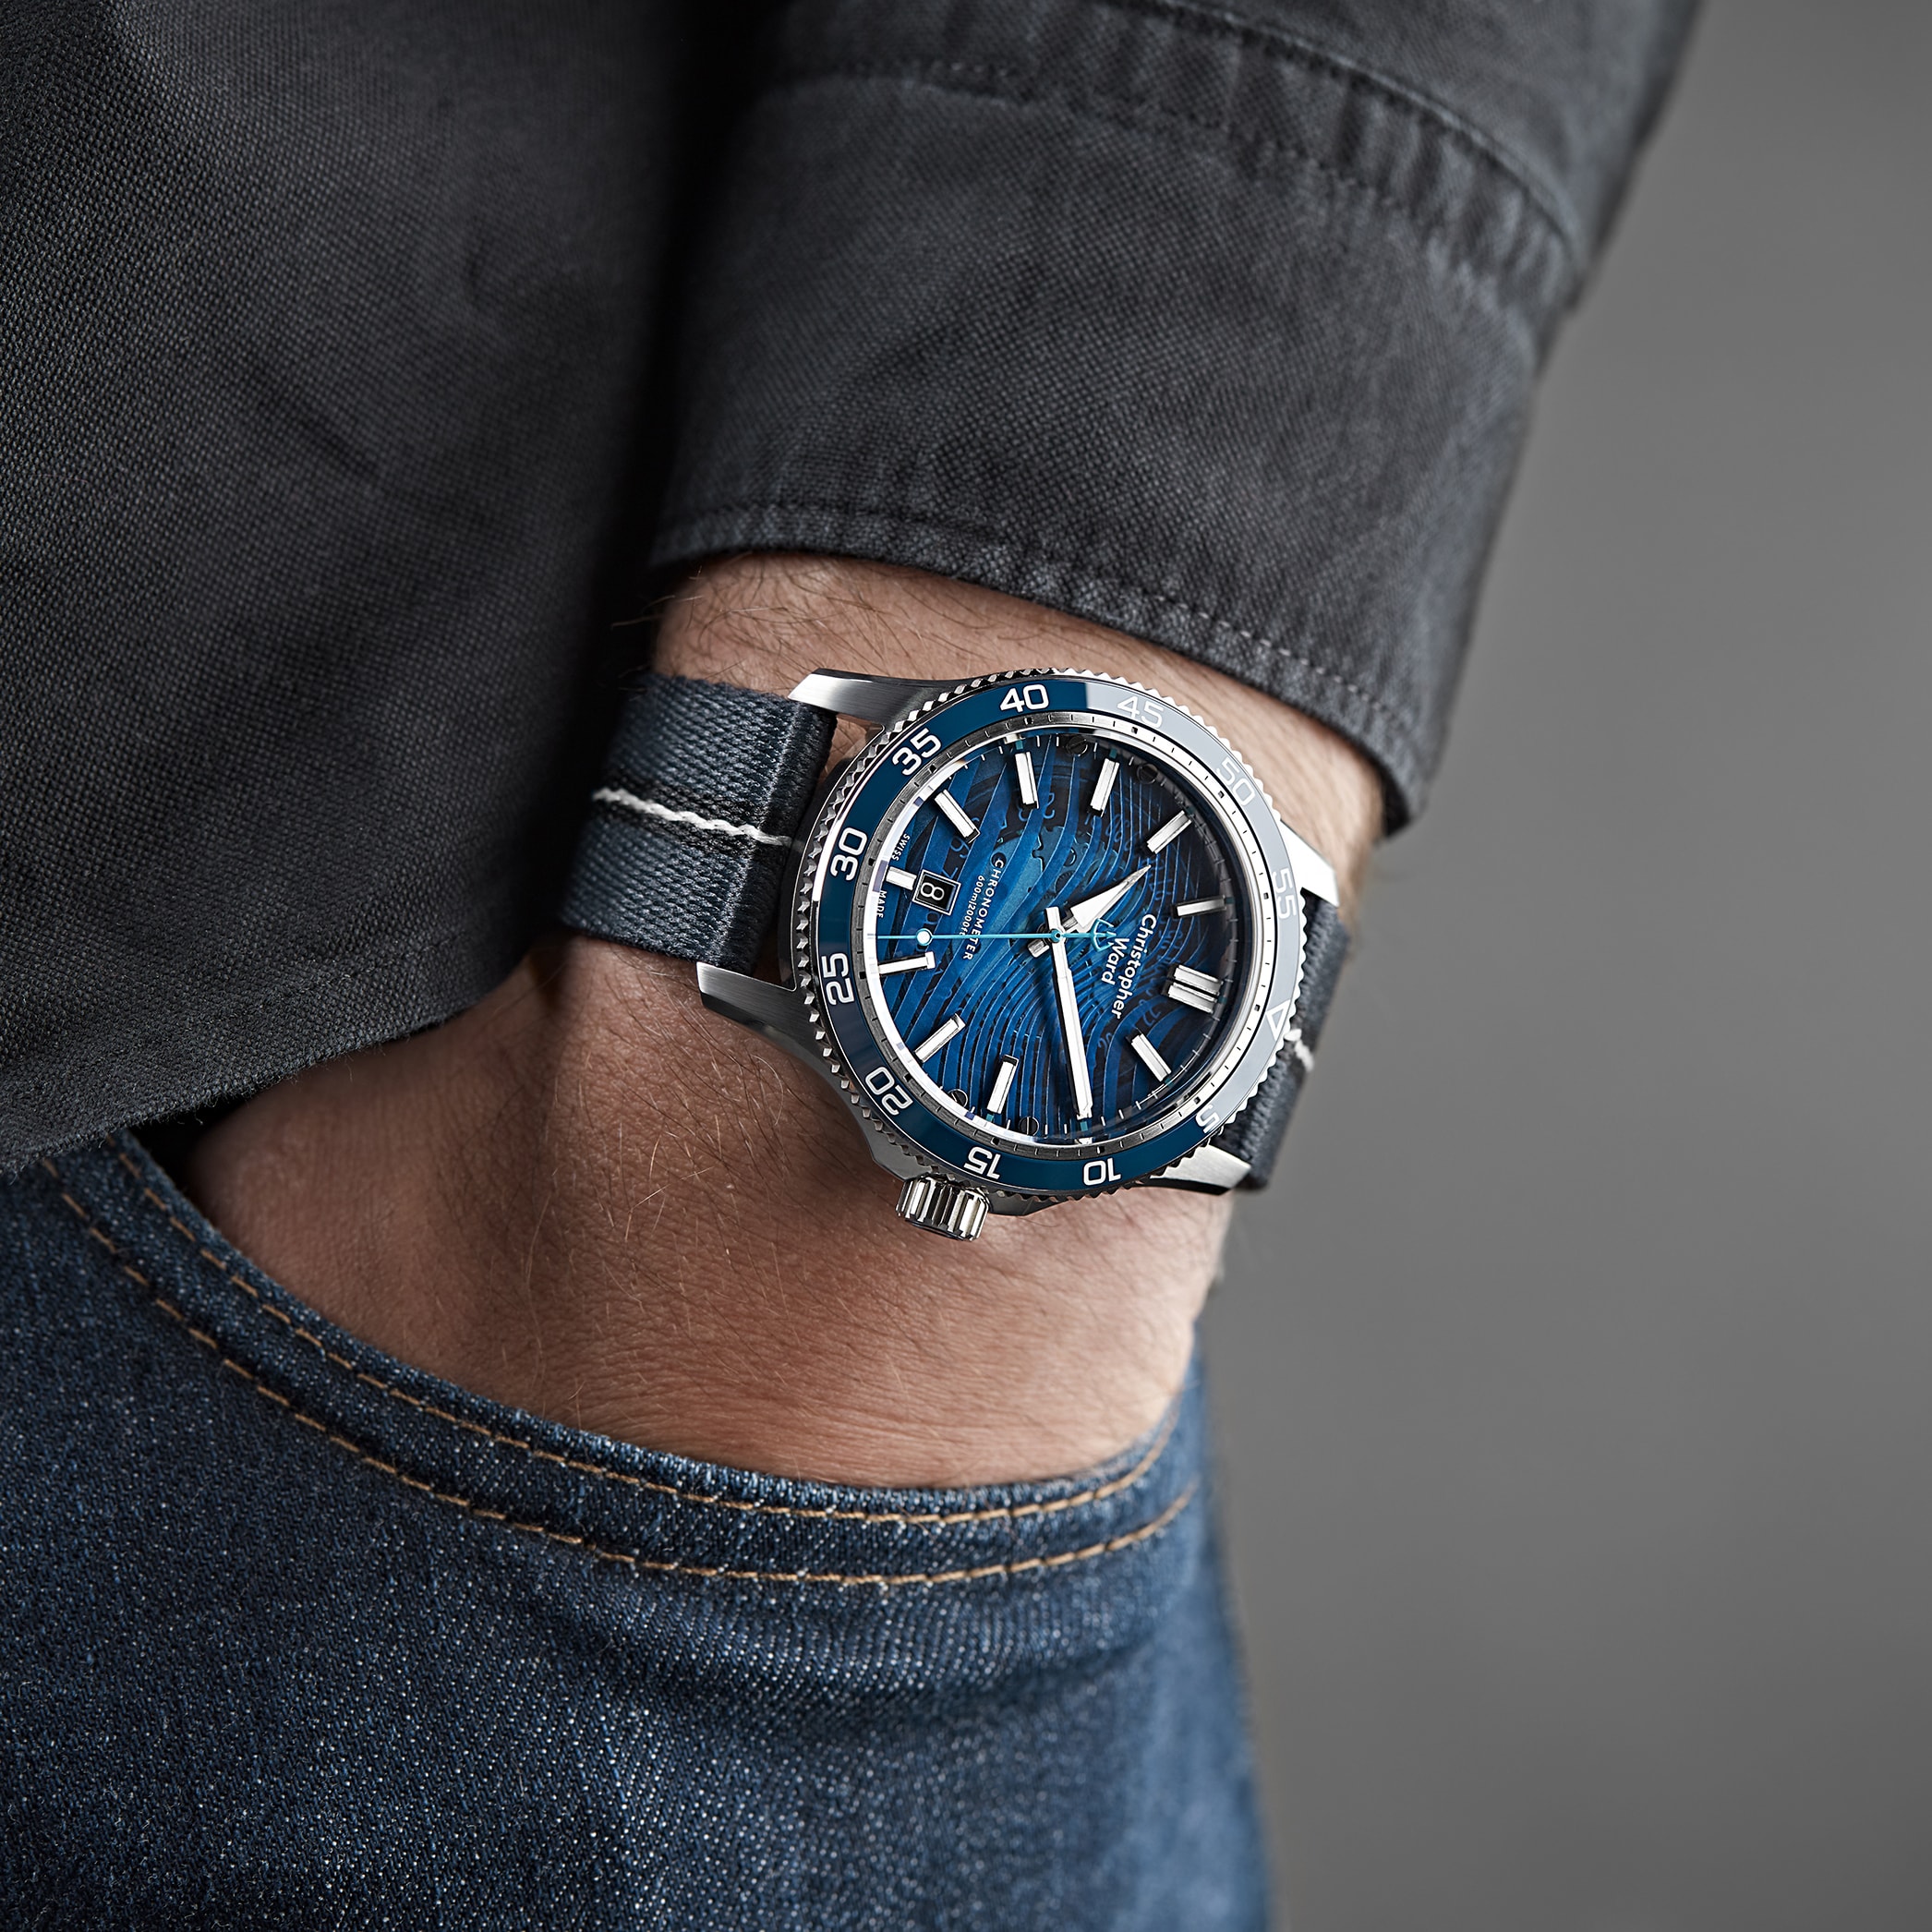 Christopher Ward Puts Ocean Material To Work In New C60 #Tide - Worn ...